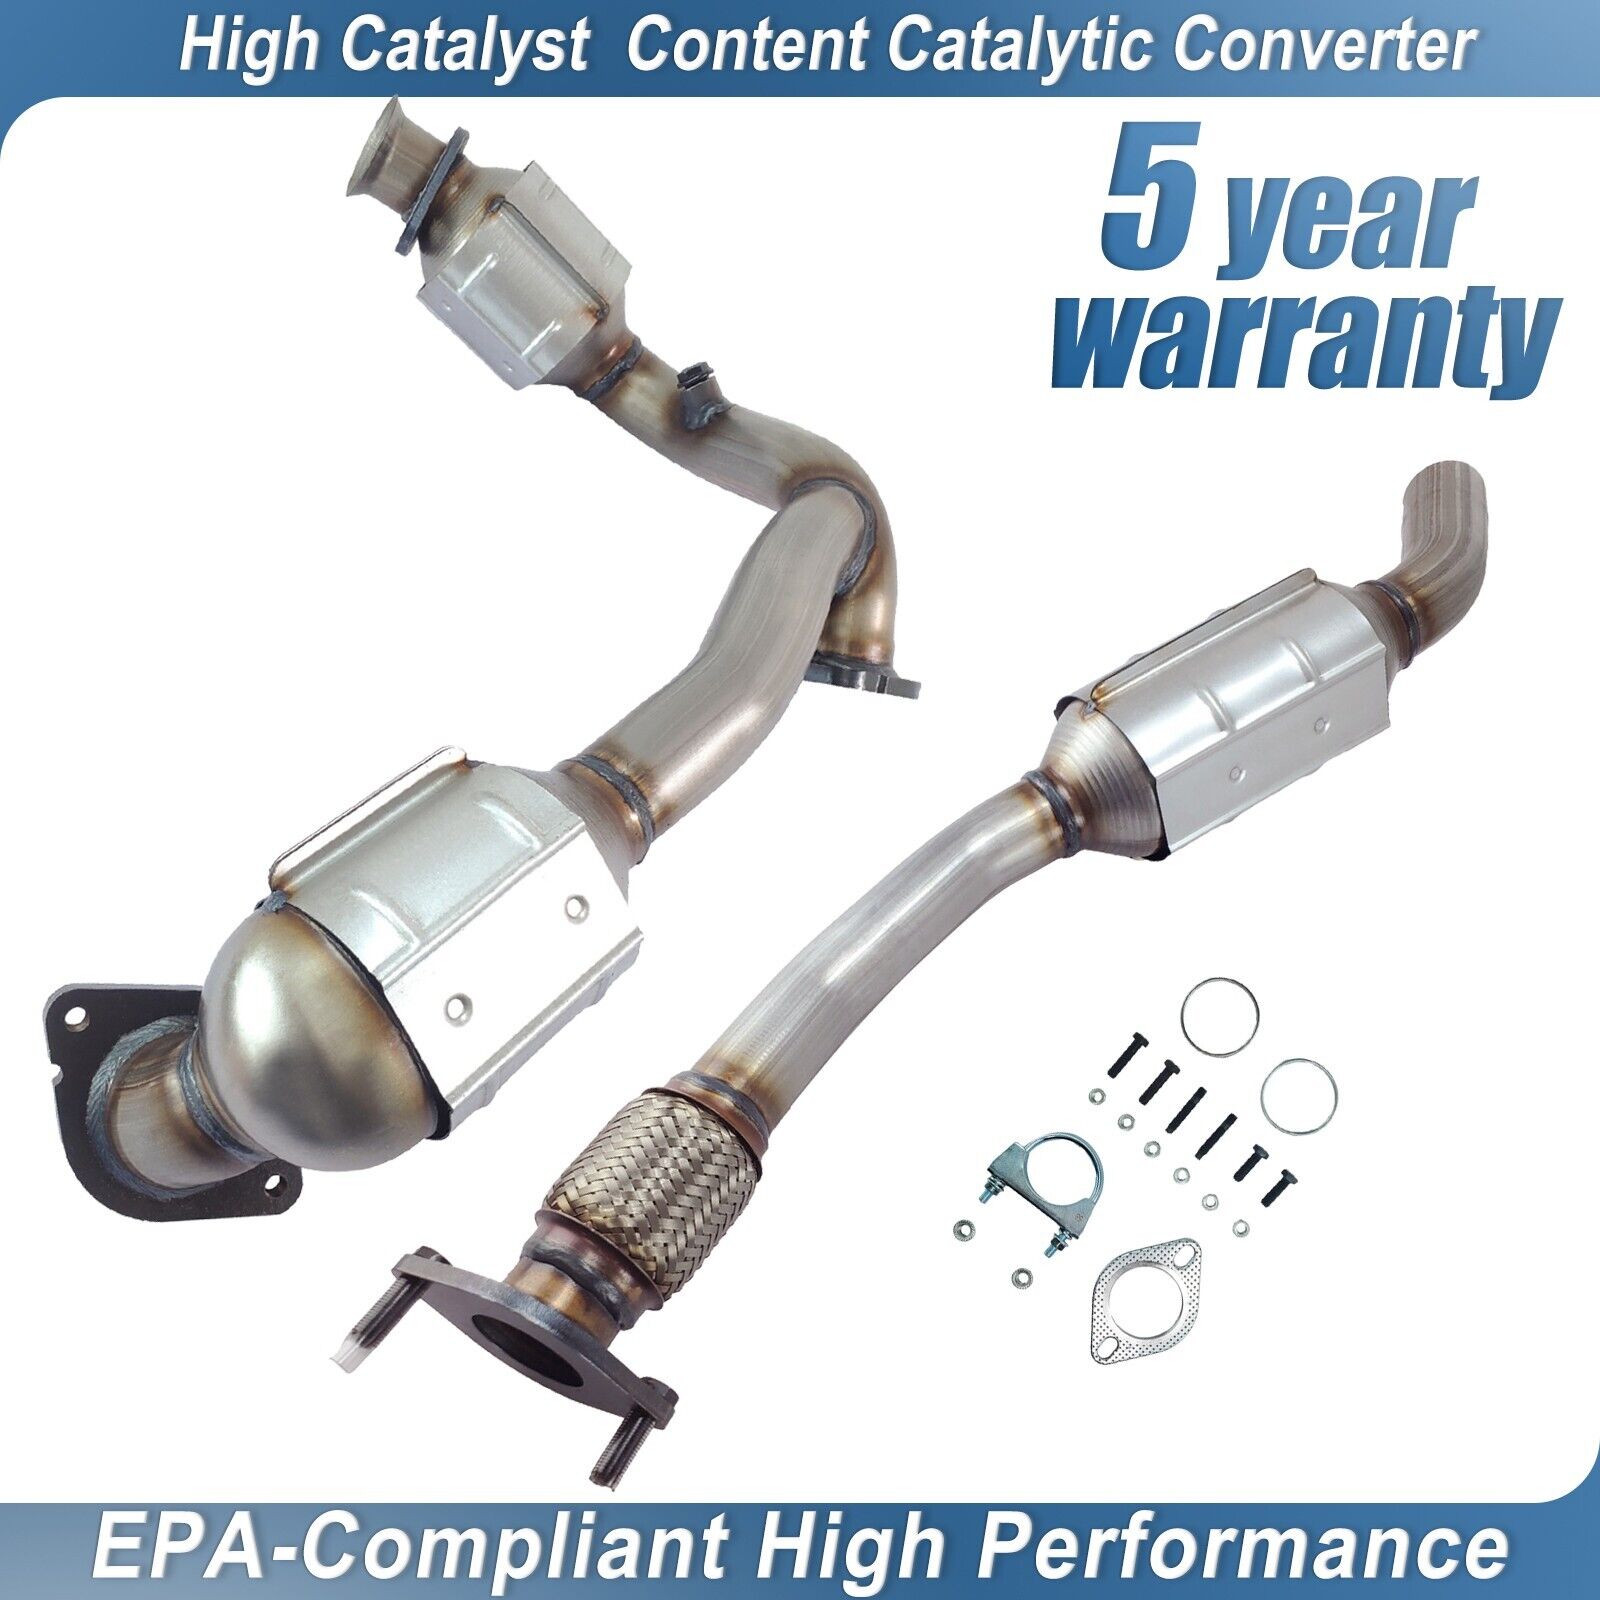 2x Catalytic Converter For Ford Taurus 2000 - 2005 2006 2007 3.0L front rear